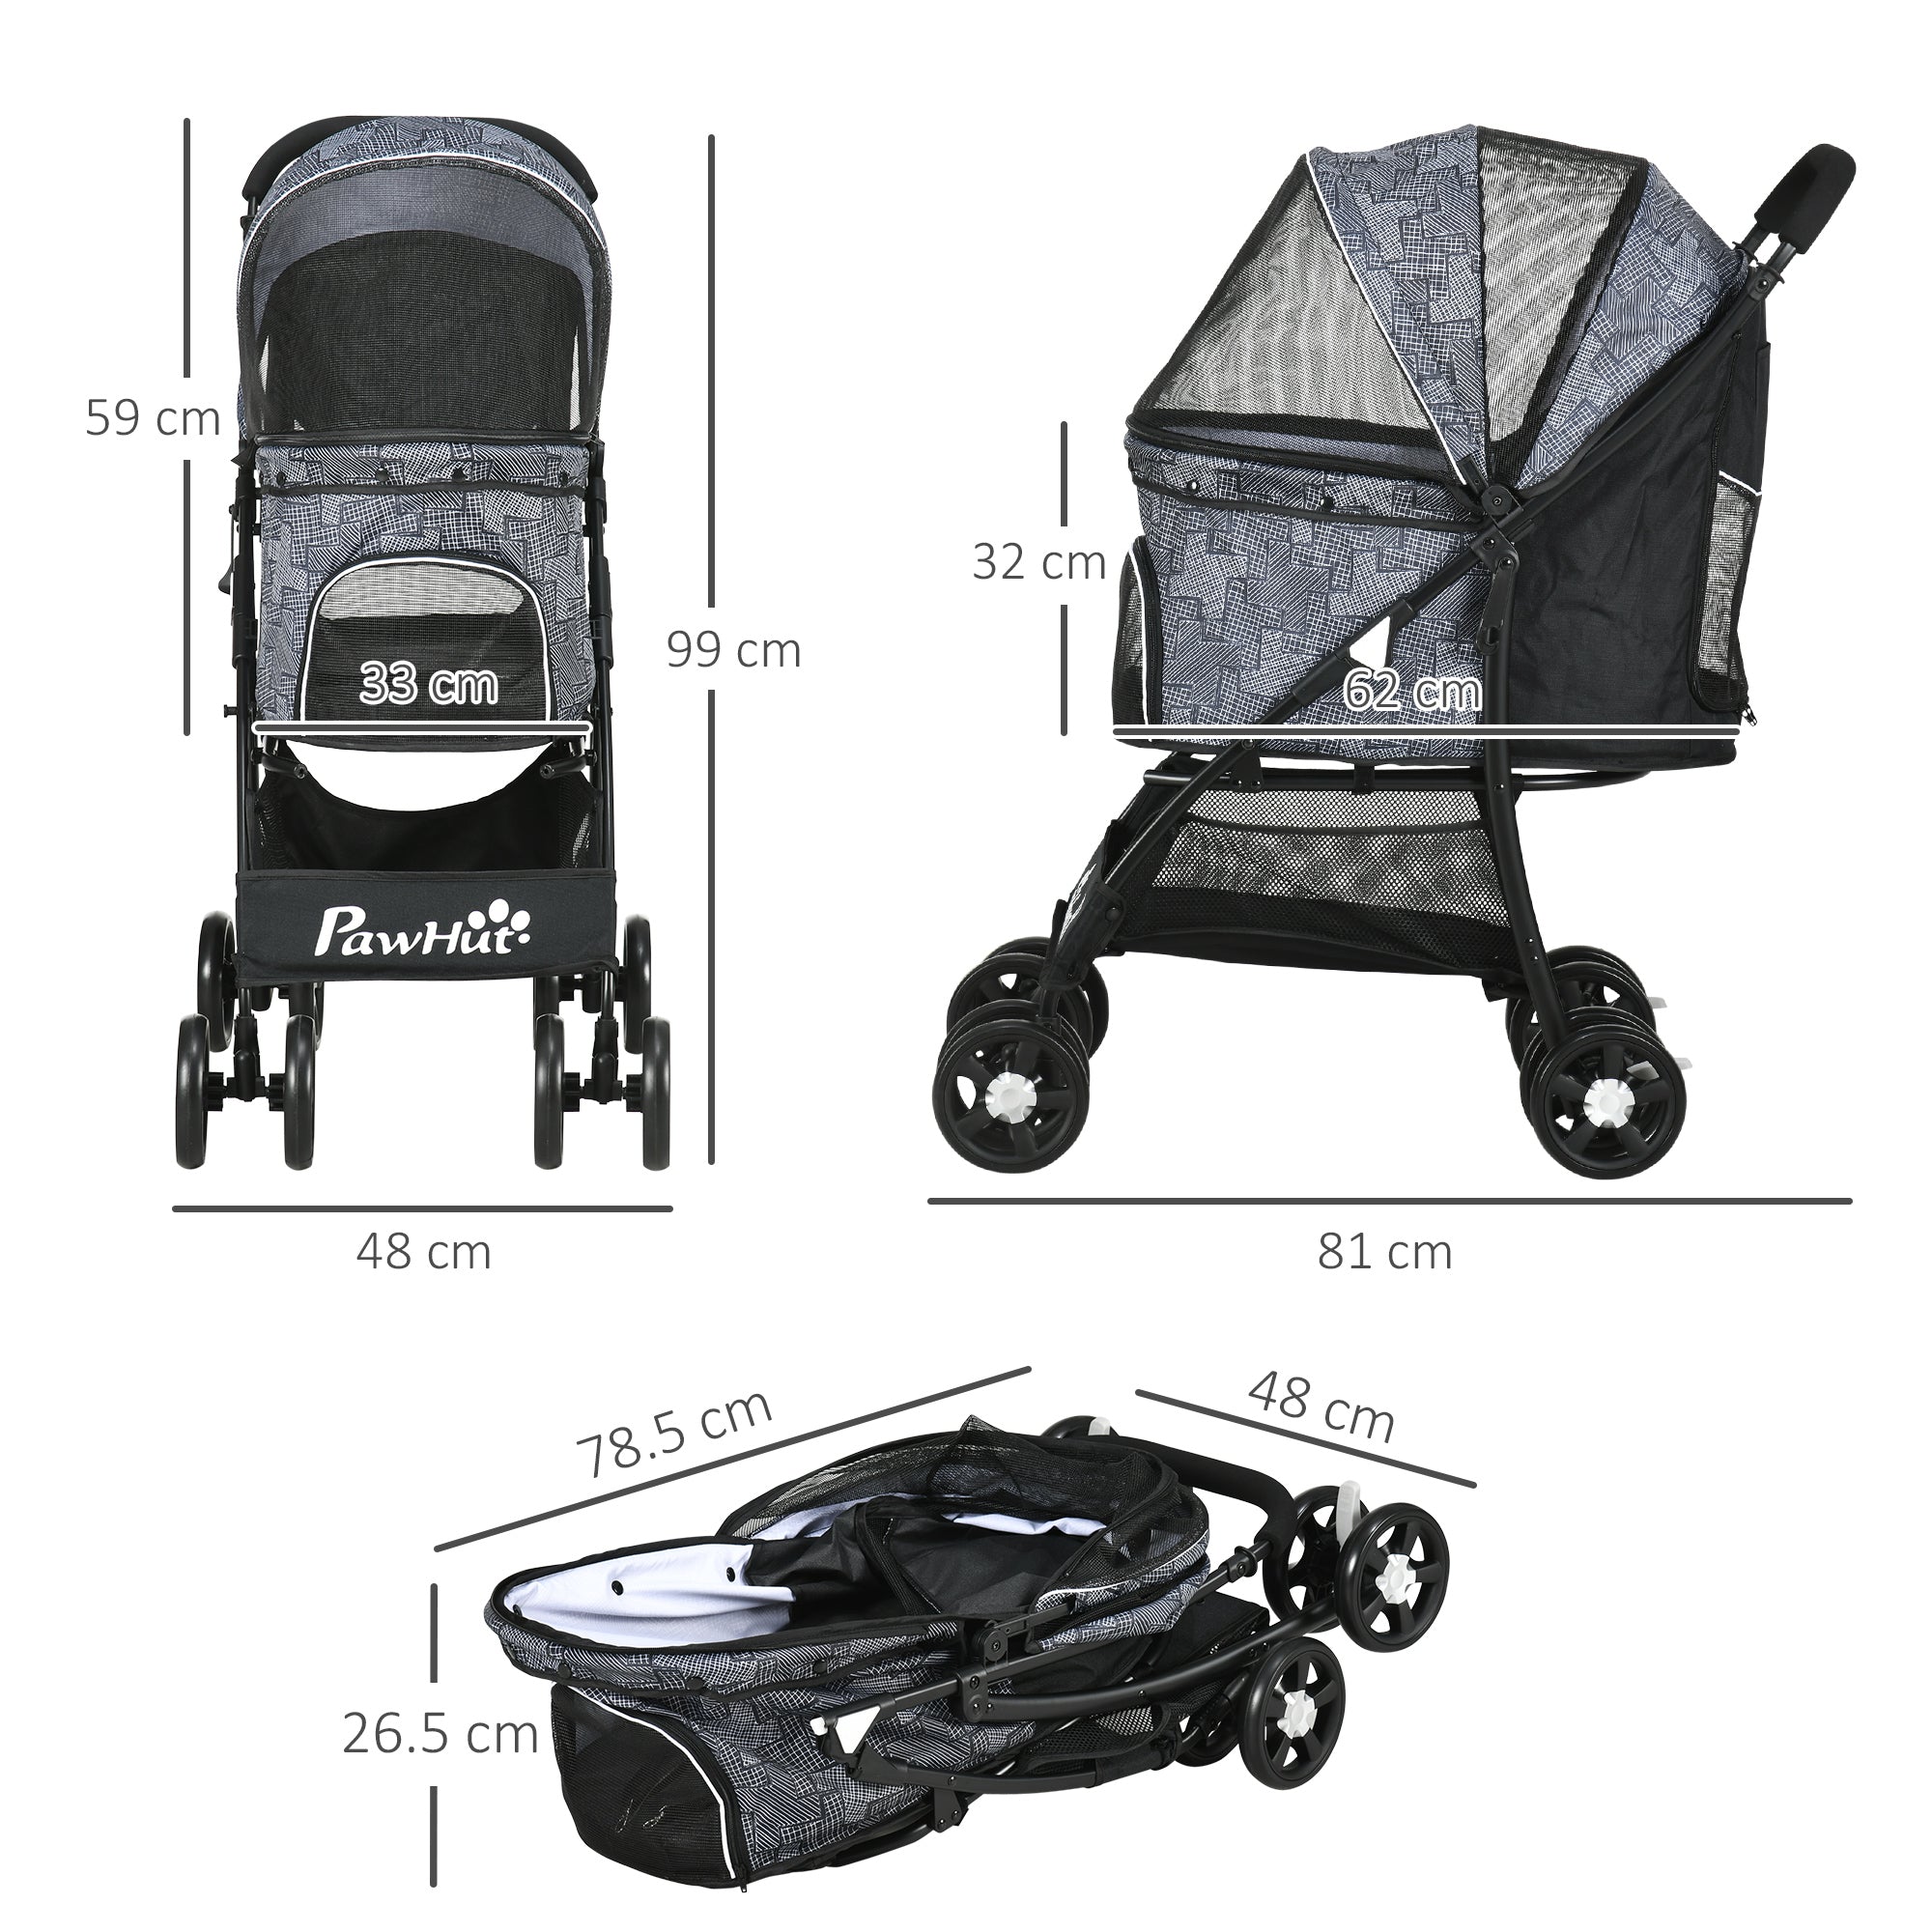 PawHut Pet Stroller Dog Pushchair Cat Travel Carriage Foldable Carrying Bag w/ Universal Wheels, Brake Canopy for XS & S Sized Pets, Grey